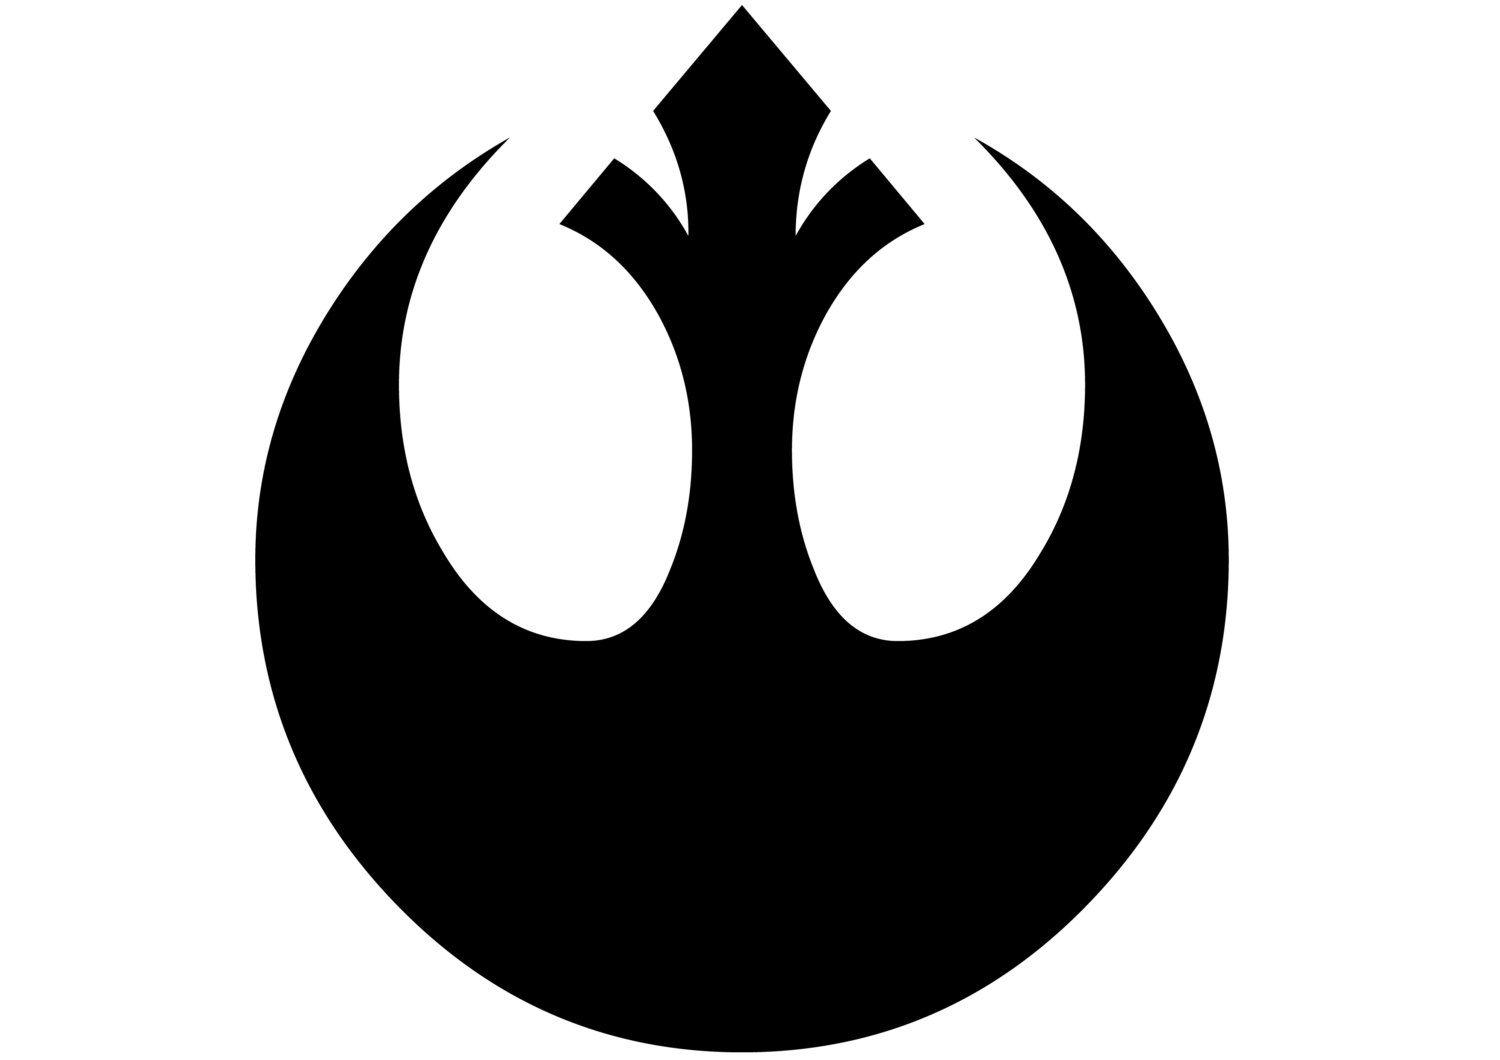 Science Fiction Logo - star wars - What does the Rebel Alliance logo represent? - Science ...